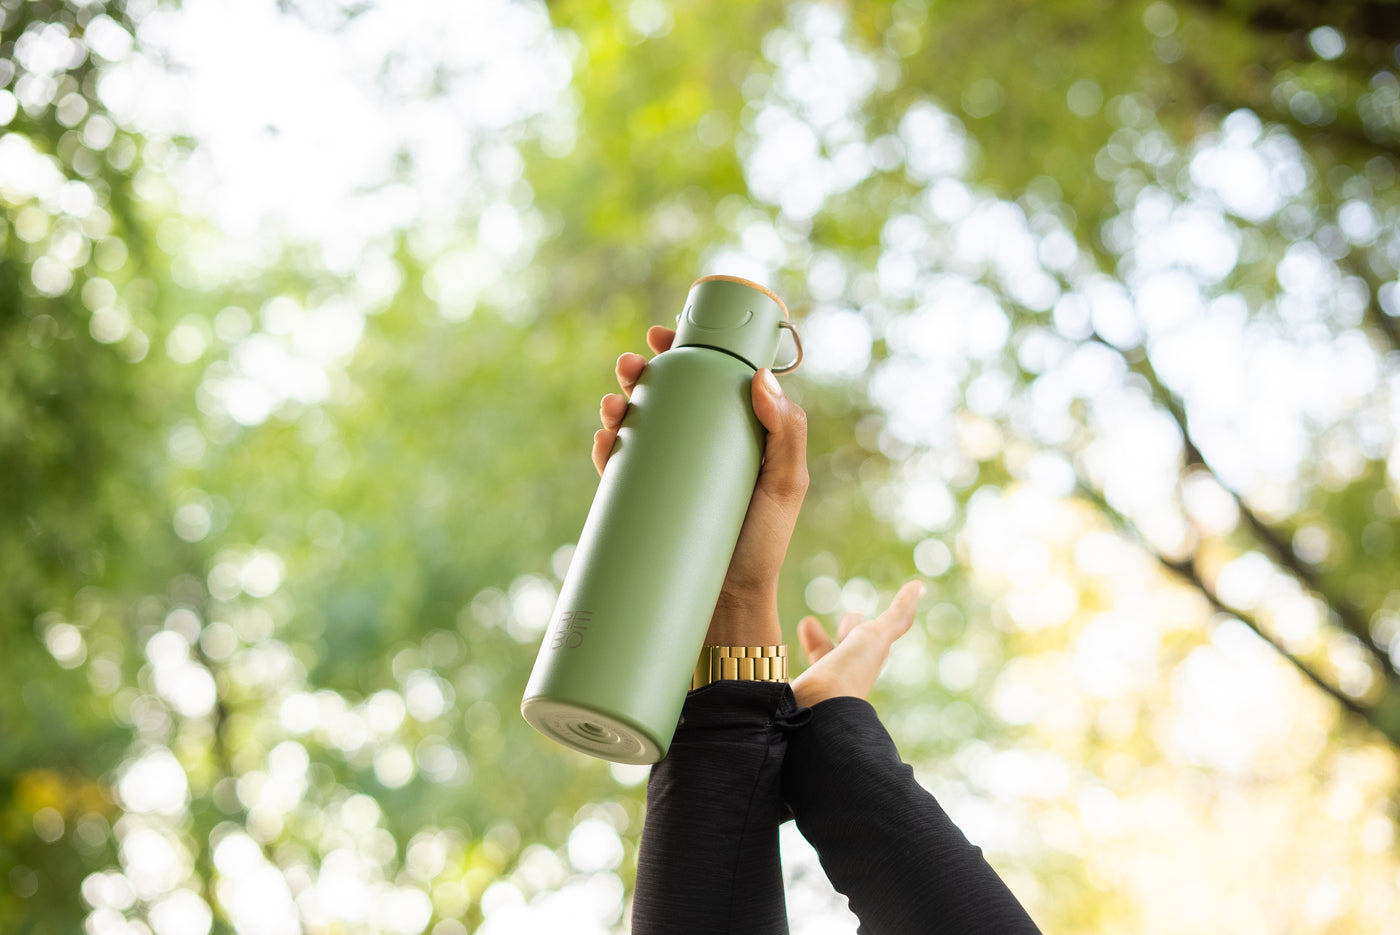 Celebrate Easter in style with REBO's reusable bottles: The perfect gift for smart and sustainable hydration